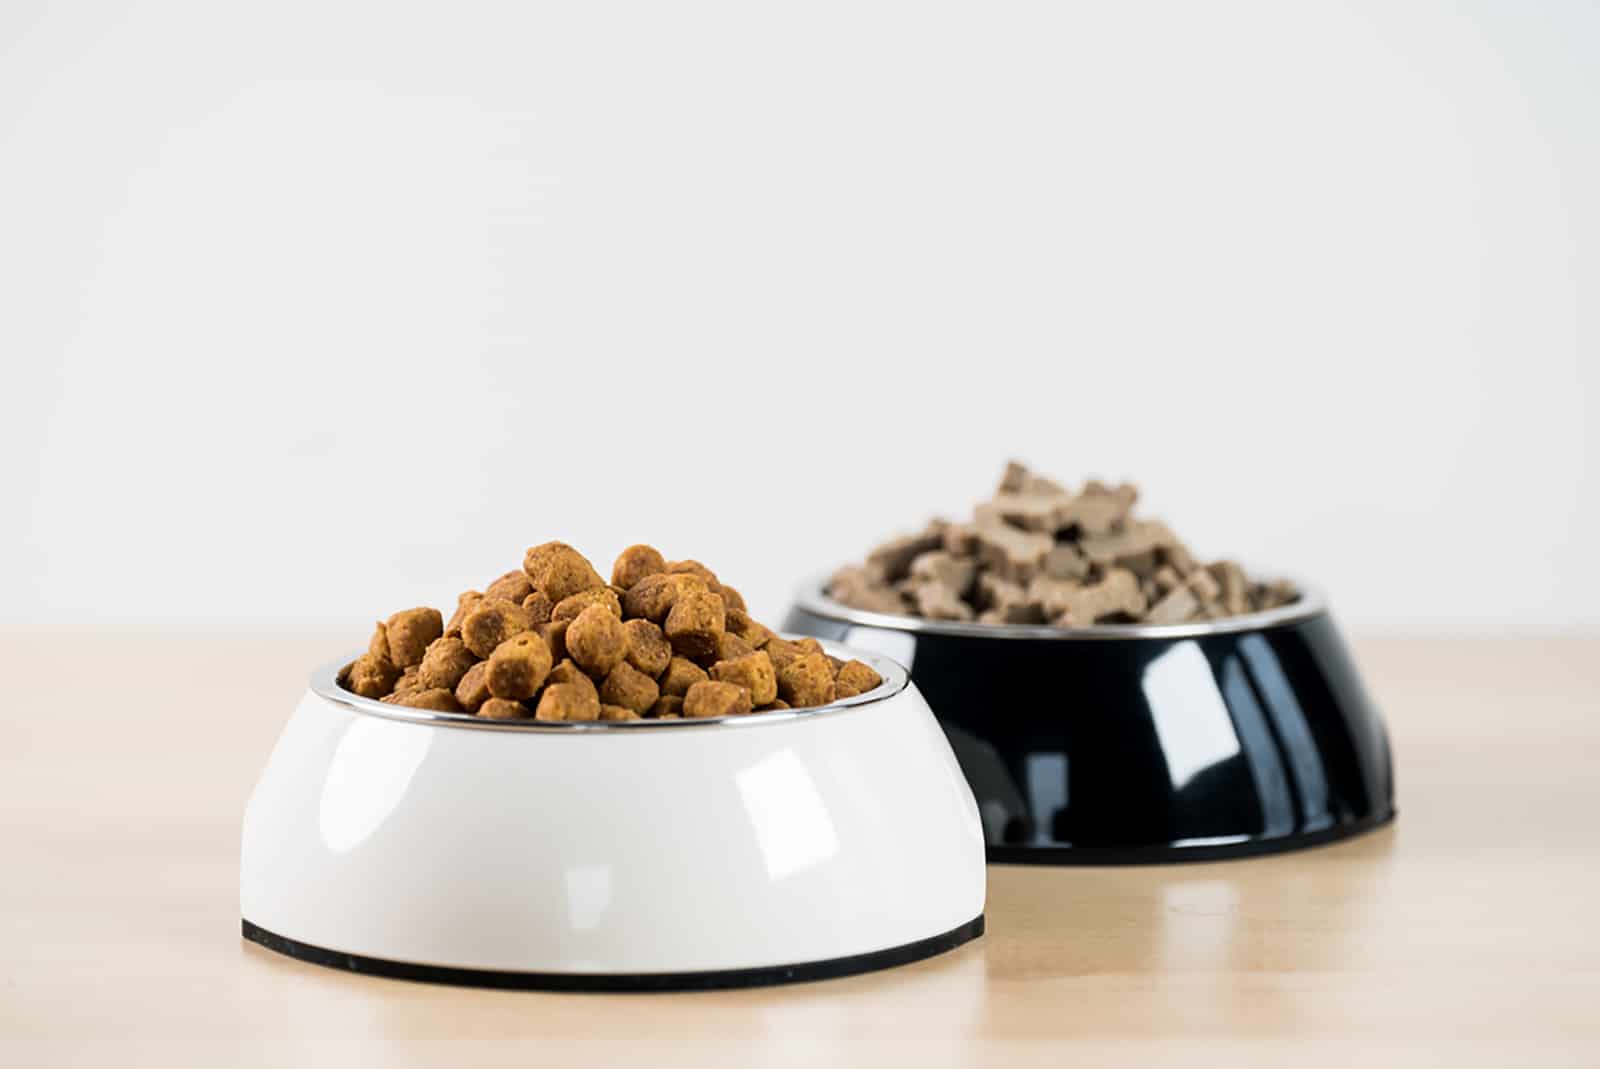 two bowls with dog food on the floor